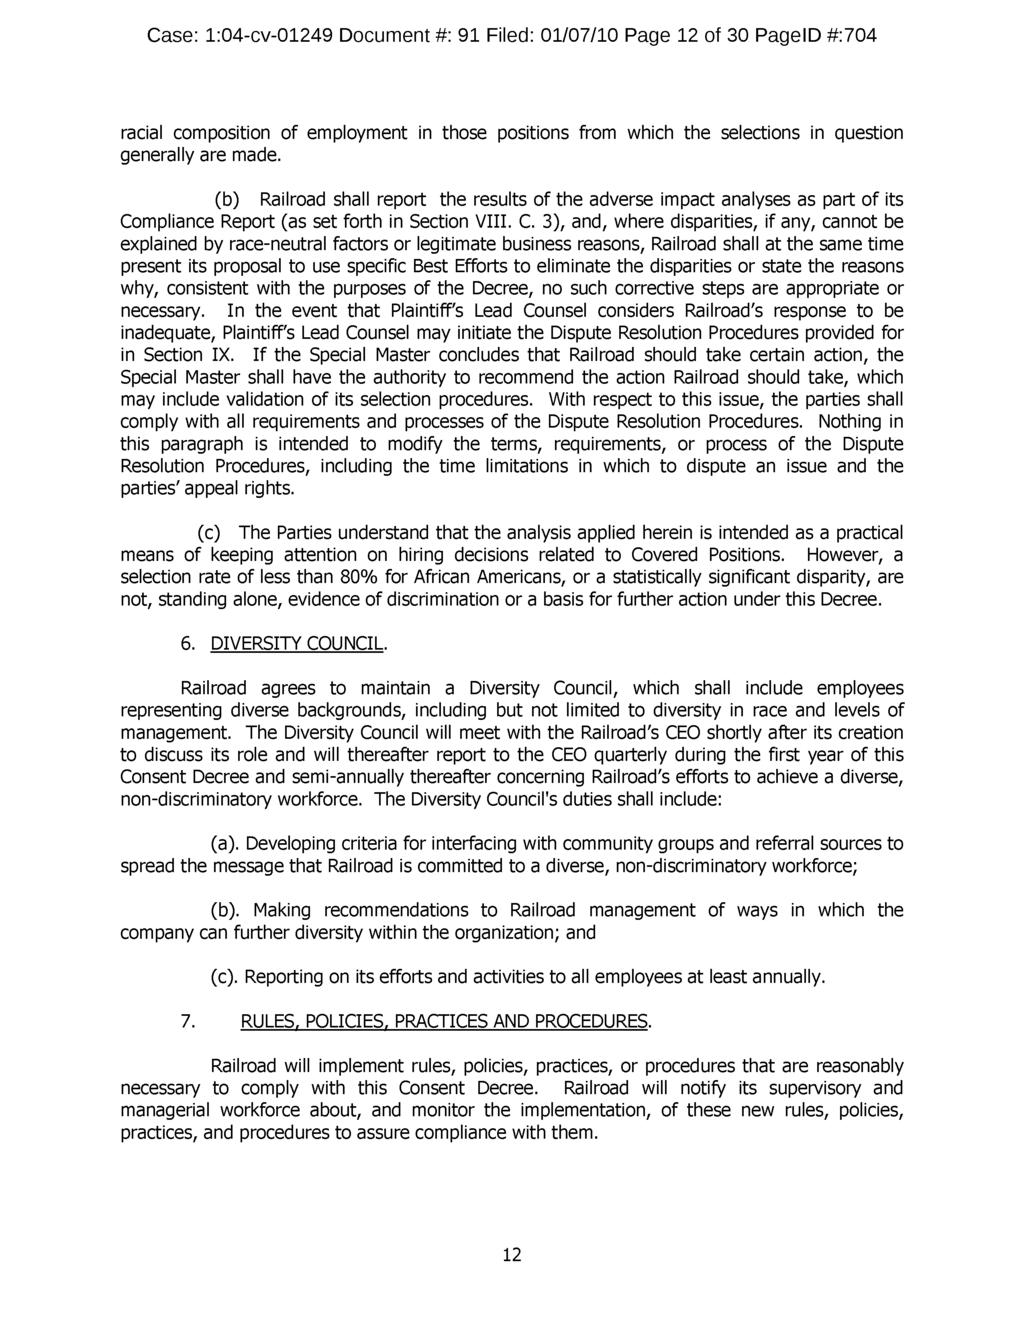 Case: 1:04-cv-01249 Document #: 91 Filed: 01/07/10 Page 12 of 30 PagelD #:704 racial composition of employment in those positions from which the selections in question generally are made.